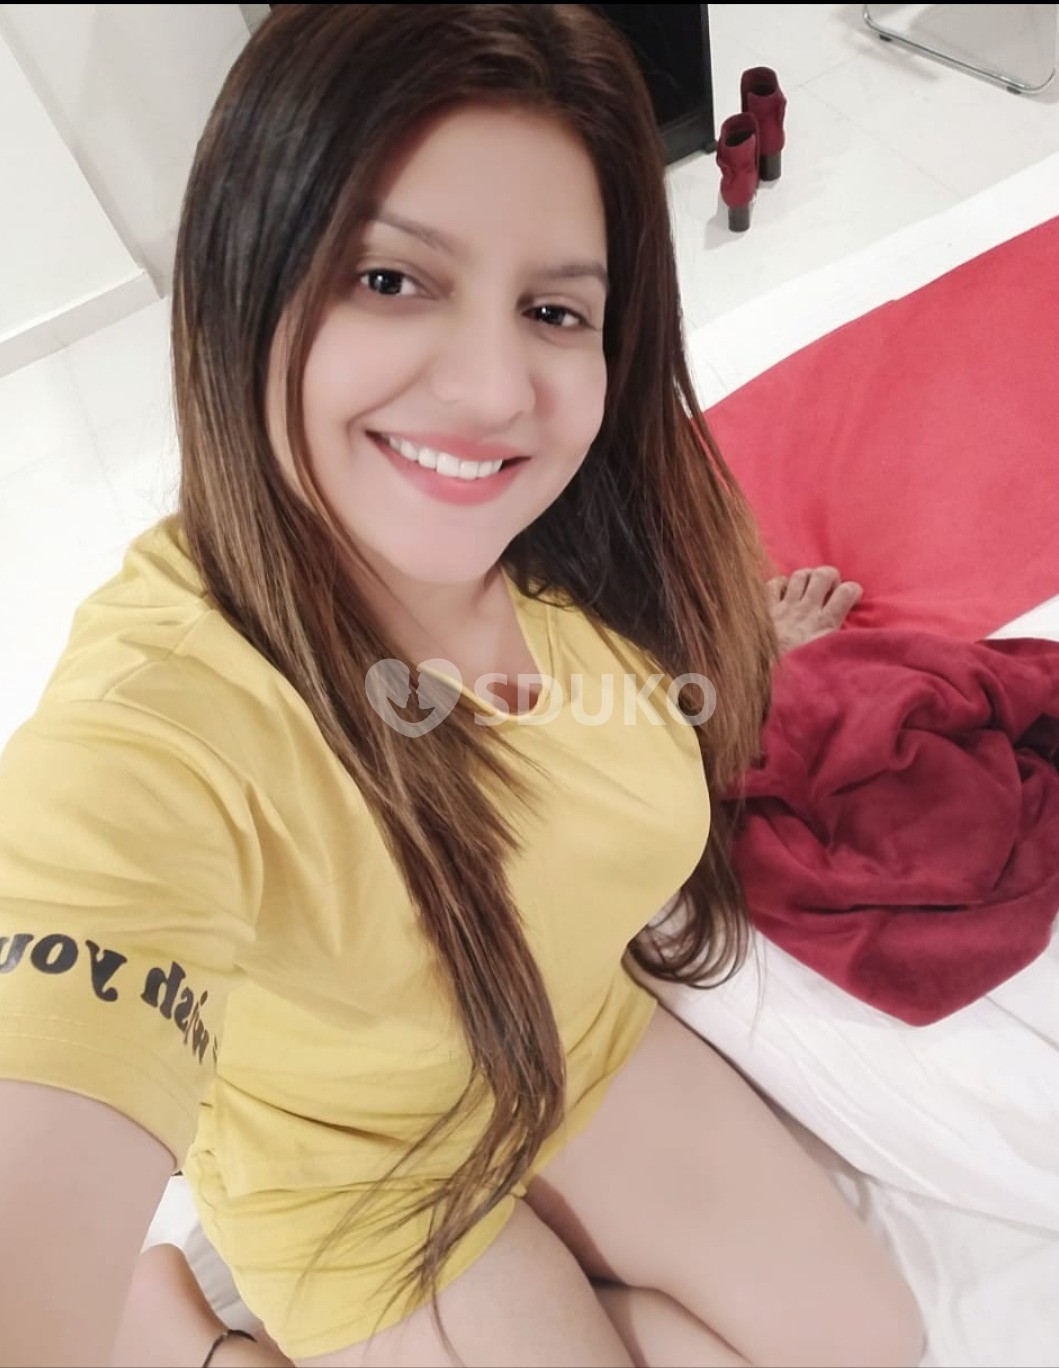 AJMER HOT AND HIGH PROFILE VIP CALL 24 X 7 HRS AVAILABLE ANAL ORAL BLOWJOB AVAILABLE ANYTIME CALL ME